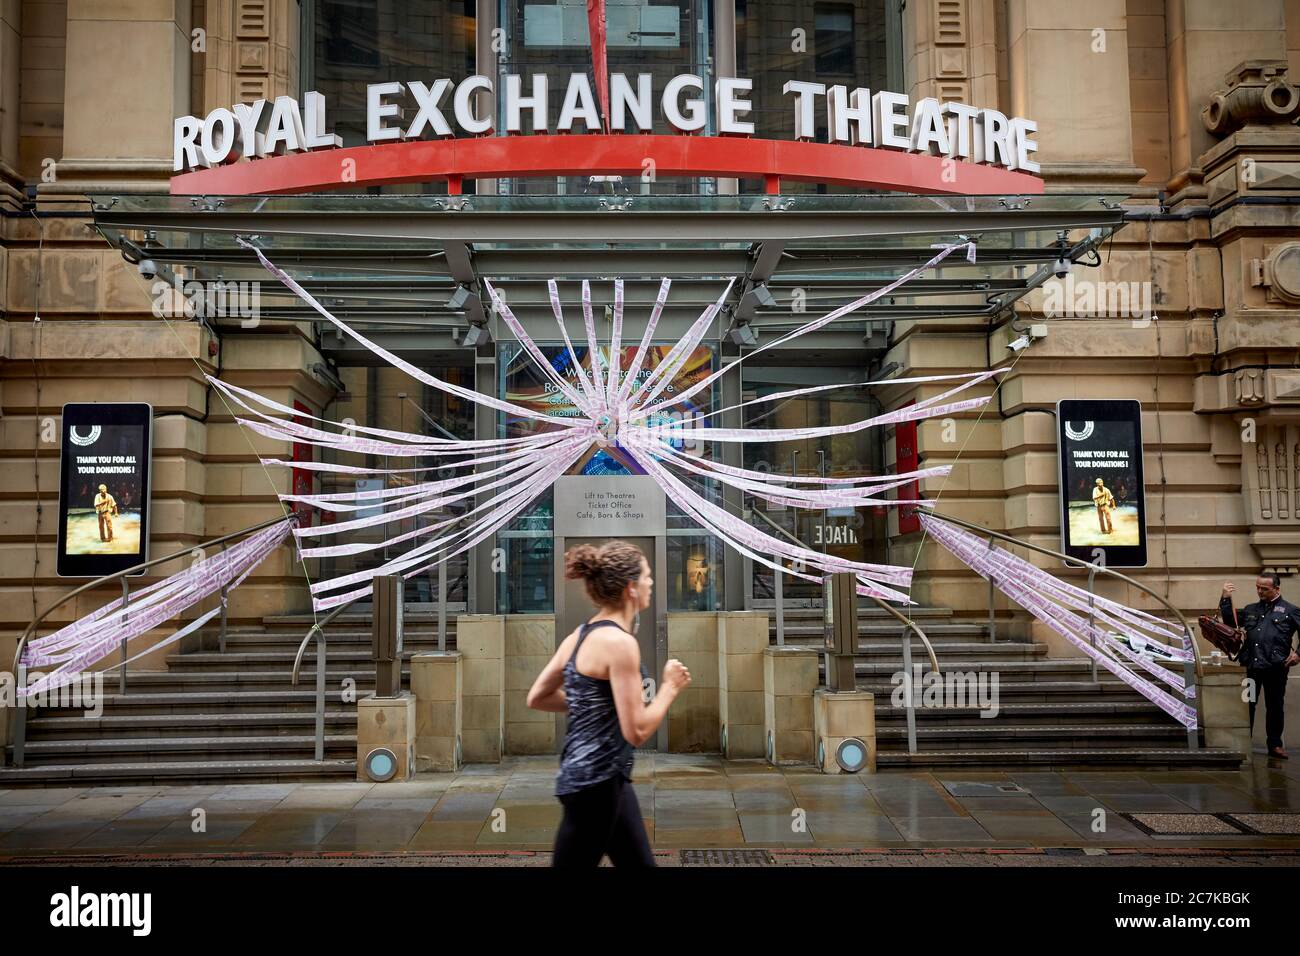 Royal Exchange Theatre in Manchester closed because of the covid 19 pandemic Stock Photo